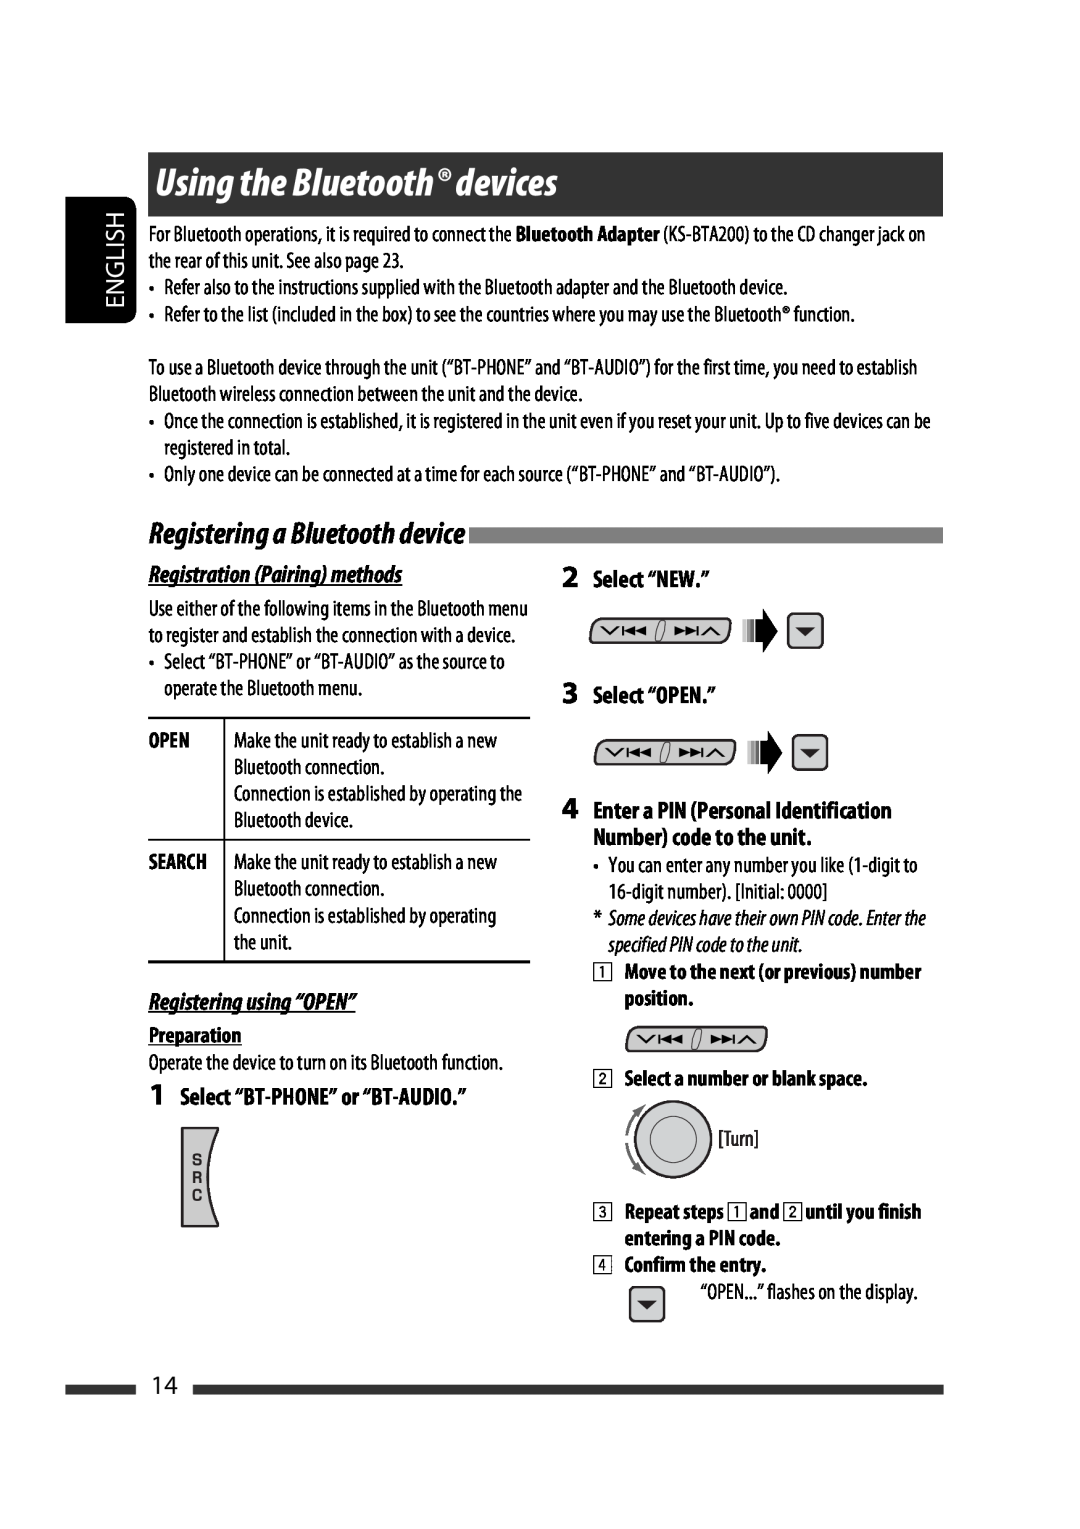 JVC KD-G731 Using the Bluetooth devices, Registering a Bluetooth device, Registration Pairing methods, Open, Preparation 